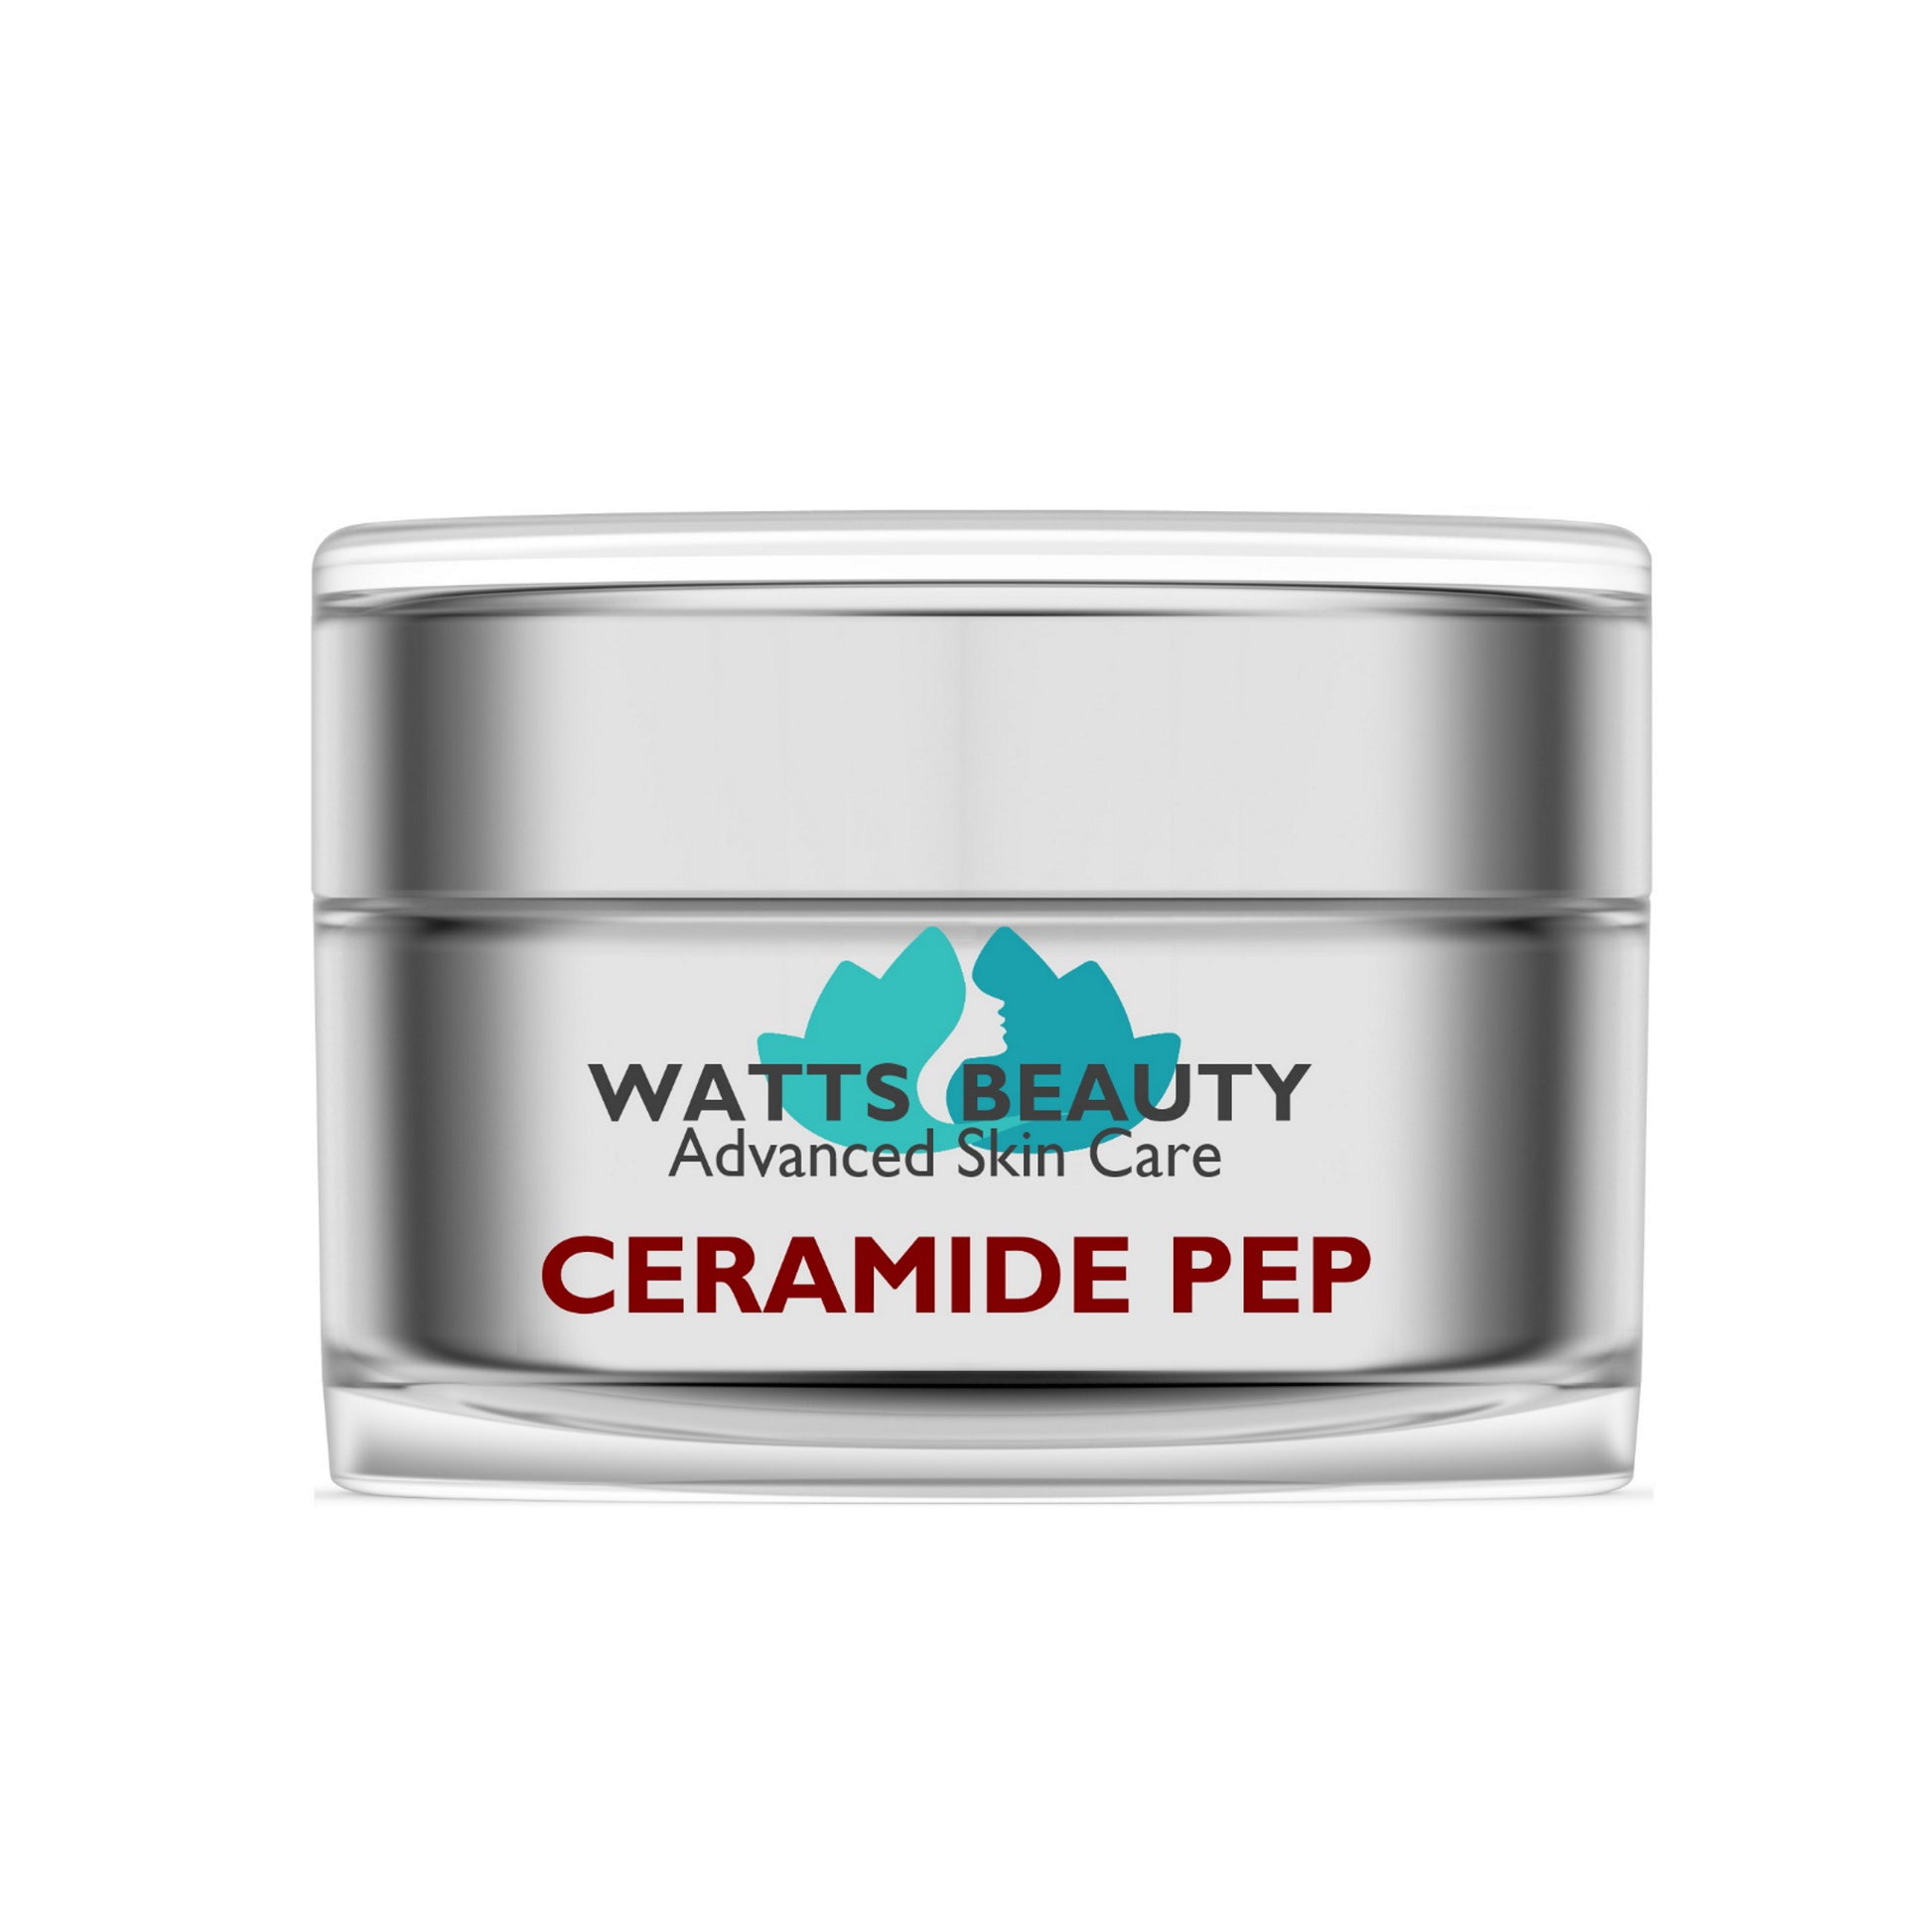 Watts Beauty Premium Ceramide Rich Night Cream Infused with Age Defying Peptides